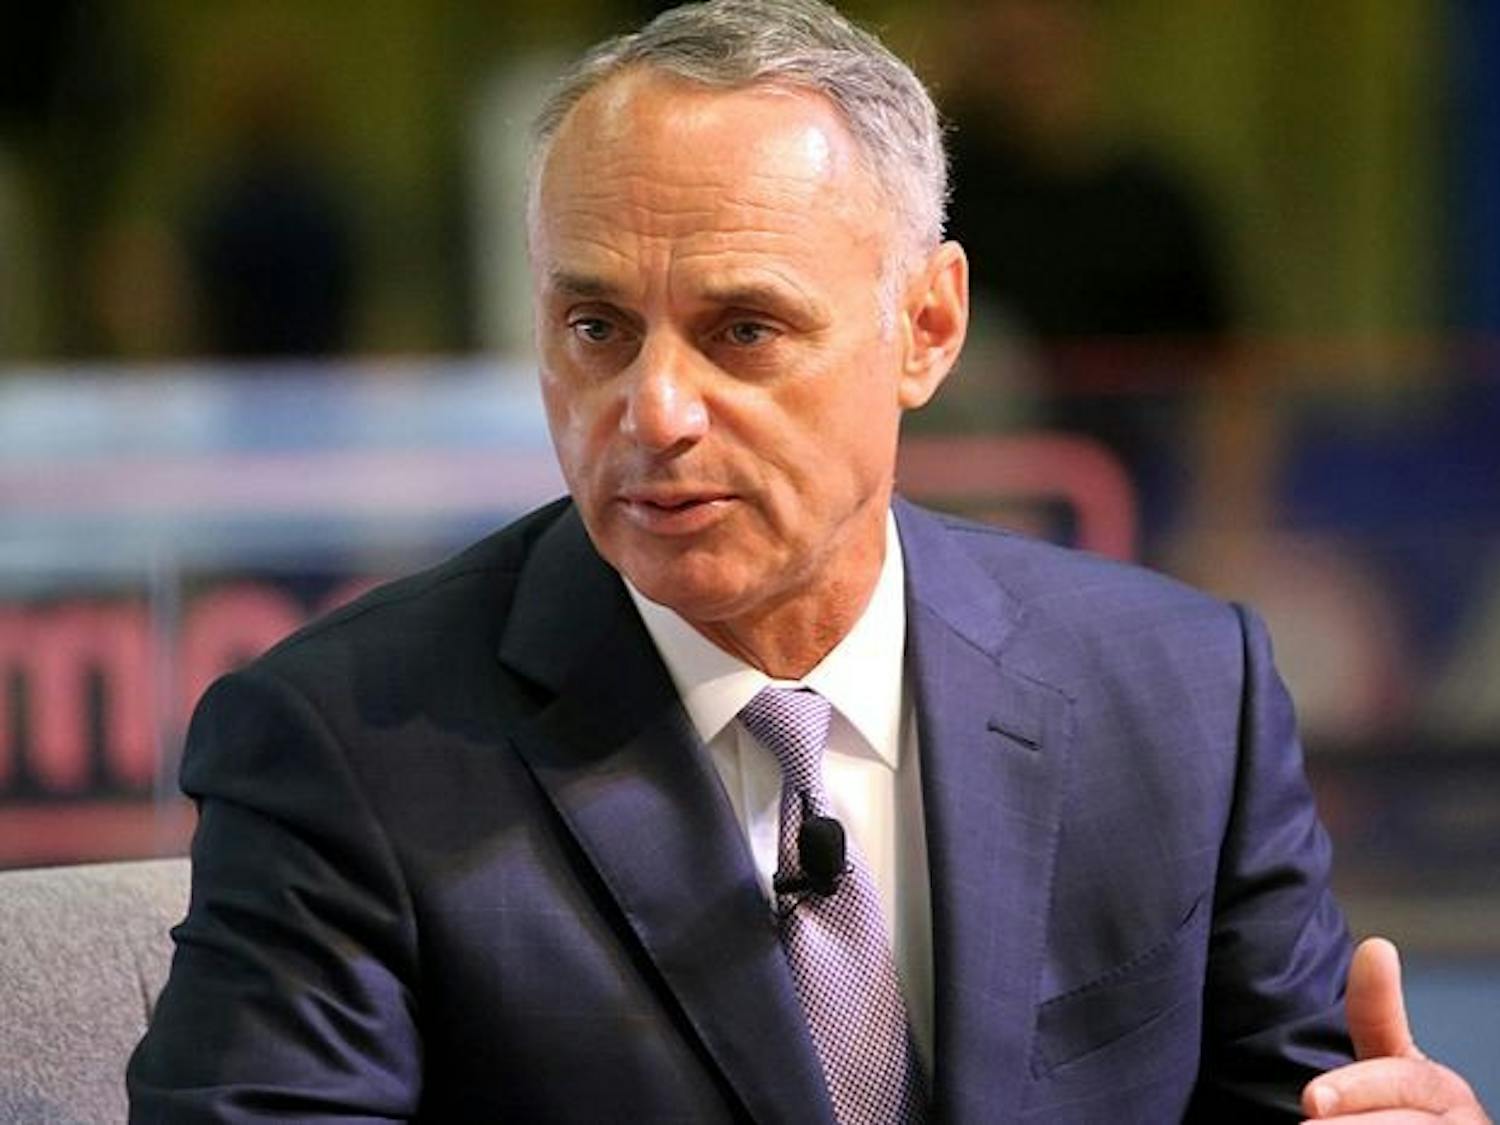 Commissioner_Rob_Manfred_conducts_his_annual_-ASG_Town_Hall_at_-FanFest_(28342735251).jpg